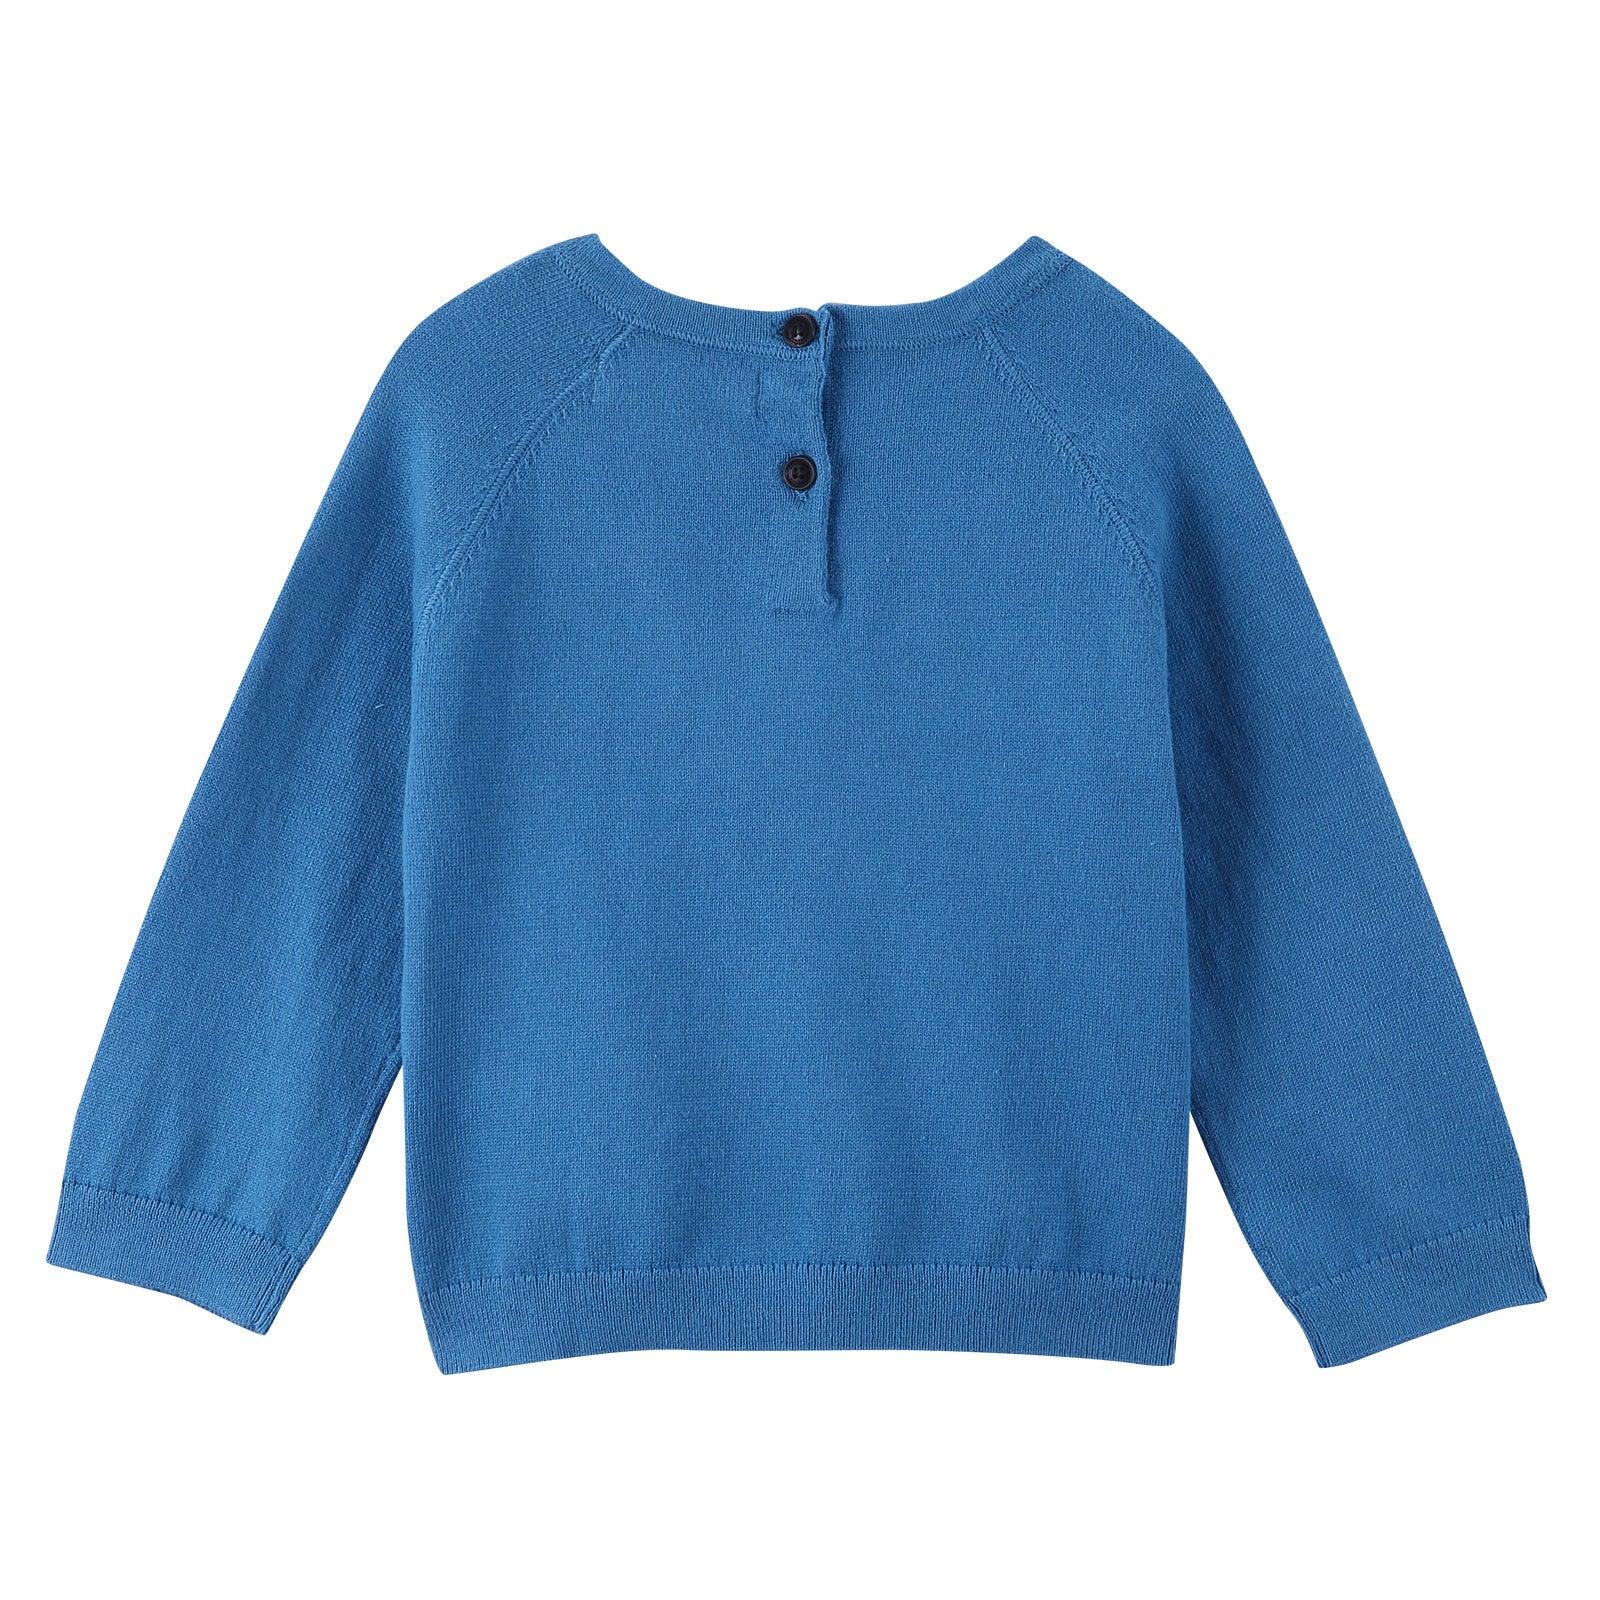 Baby Boys Light Blue Knitted Cotton Sweater - CÉMAROSE | Children's Fashion Store - 2